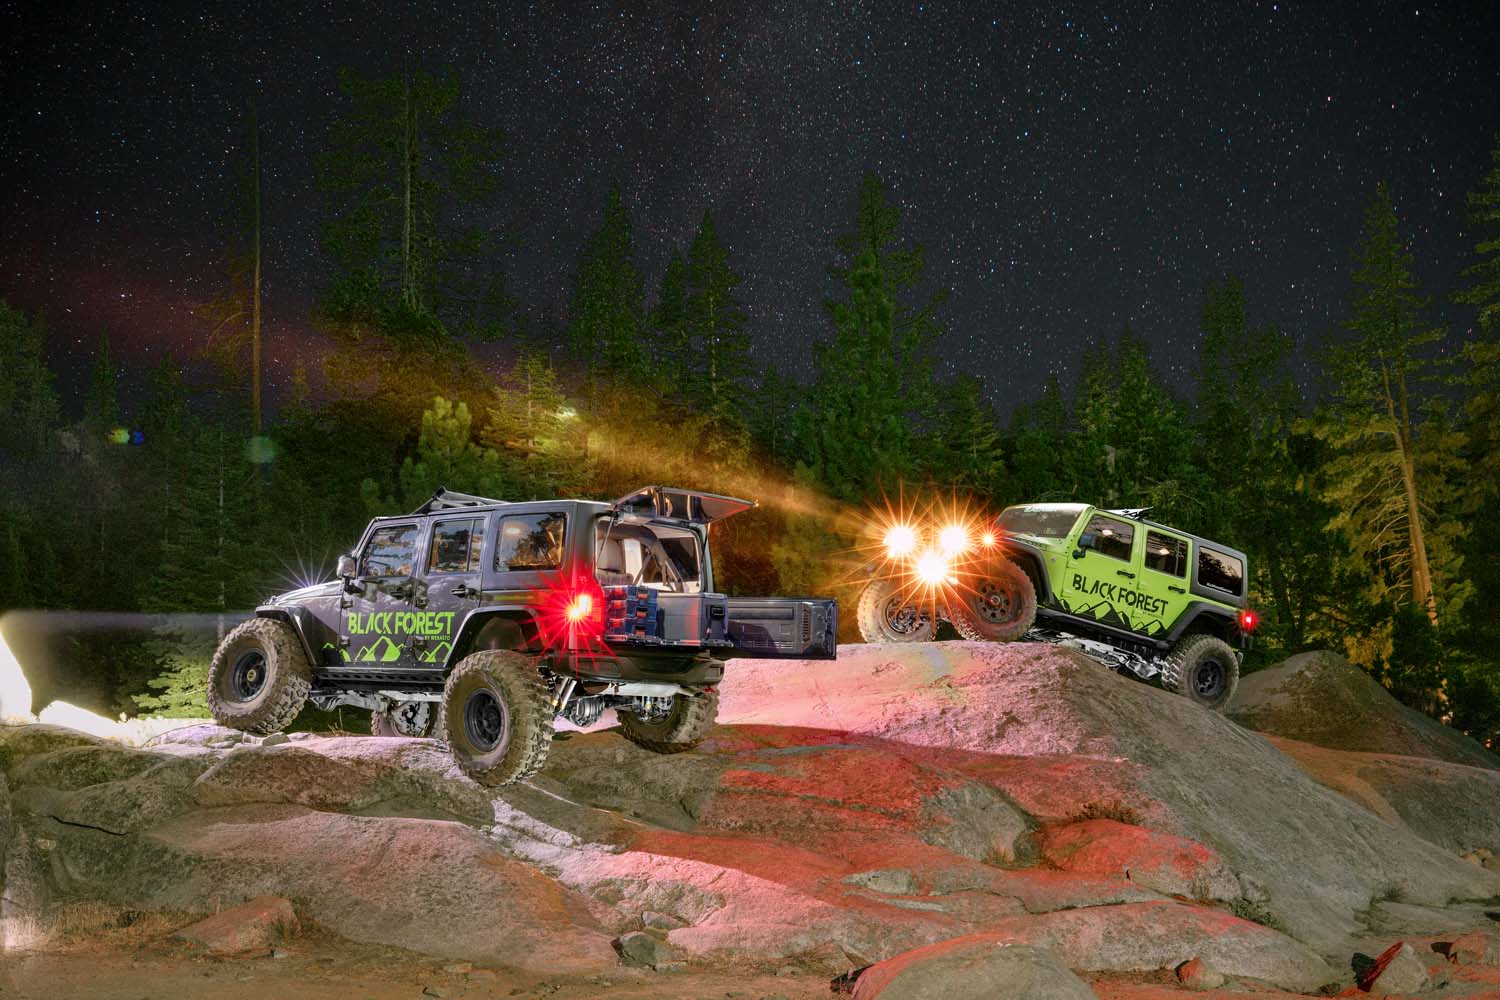 Black Forest Gear by Webasto is designed for passionate Jeep enthusiasts, by passionate Jeep enthusiasts.